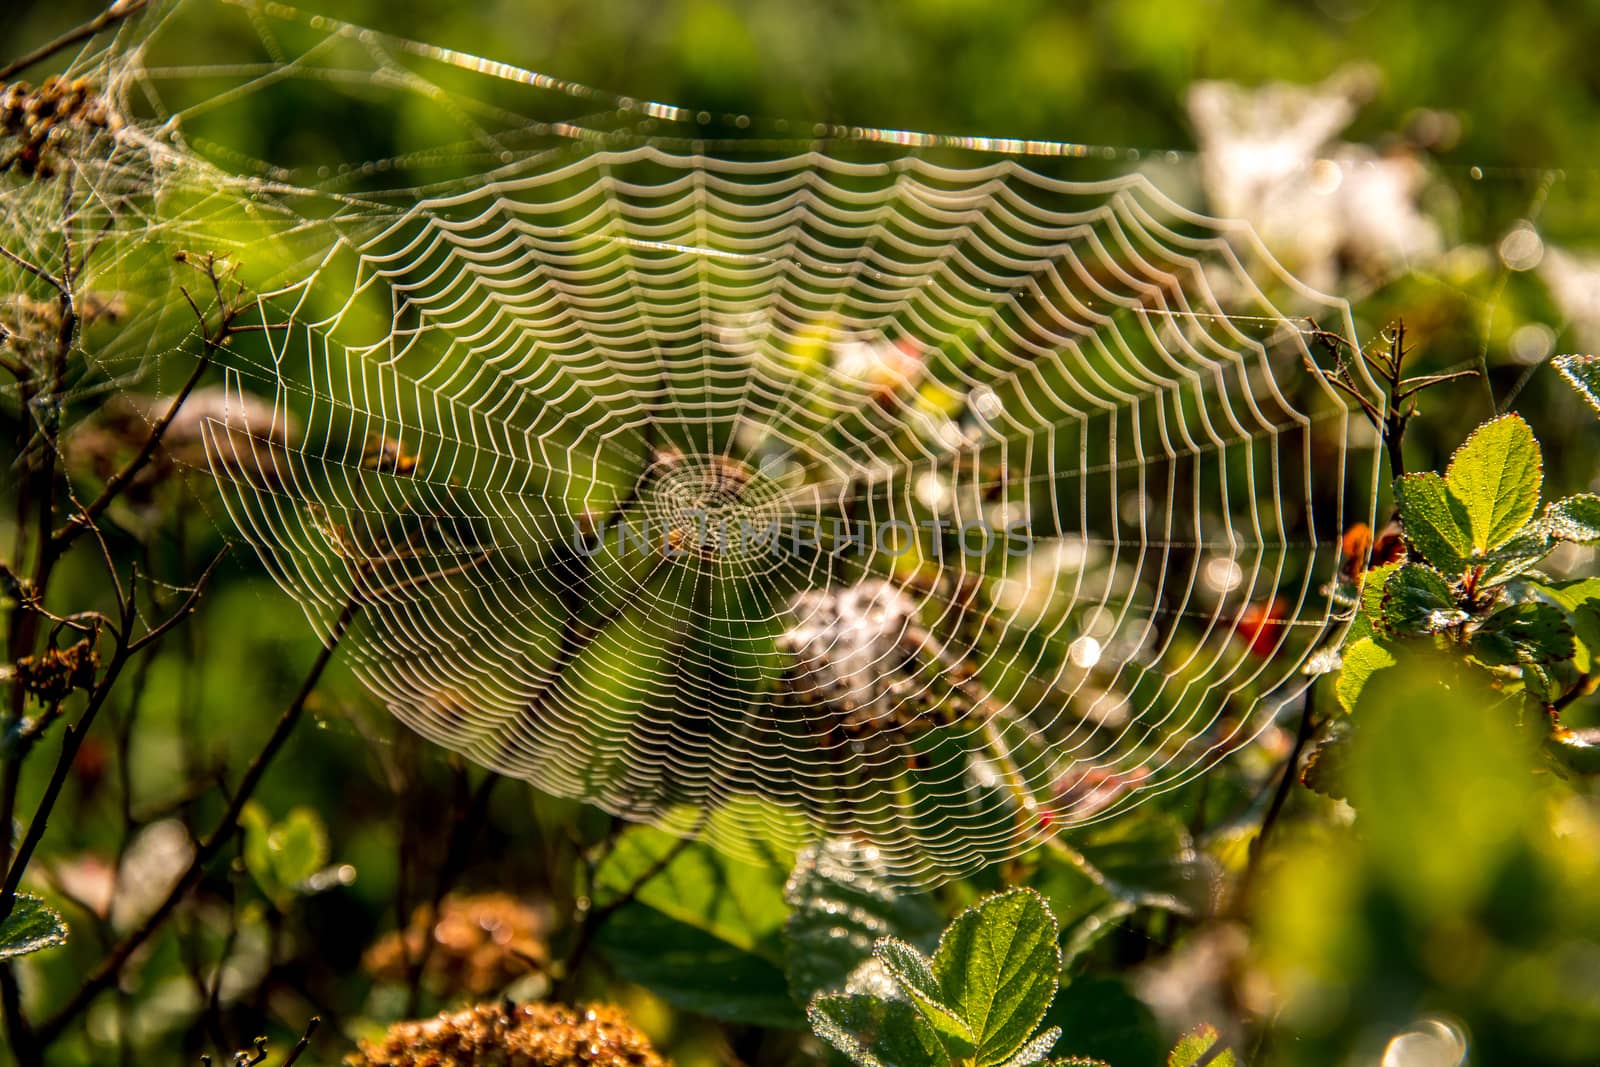 Shining water drops on spider web on green forest background in Latvia. Spider web is web made by spider. Spider net in nature. 